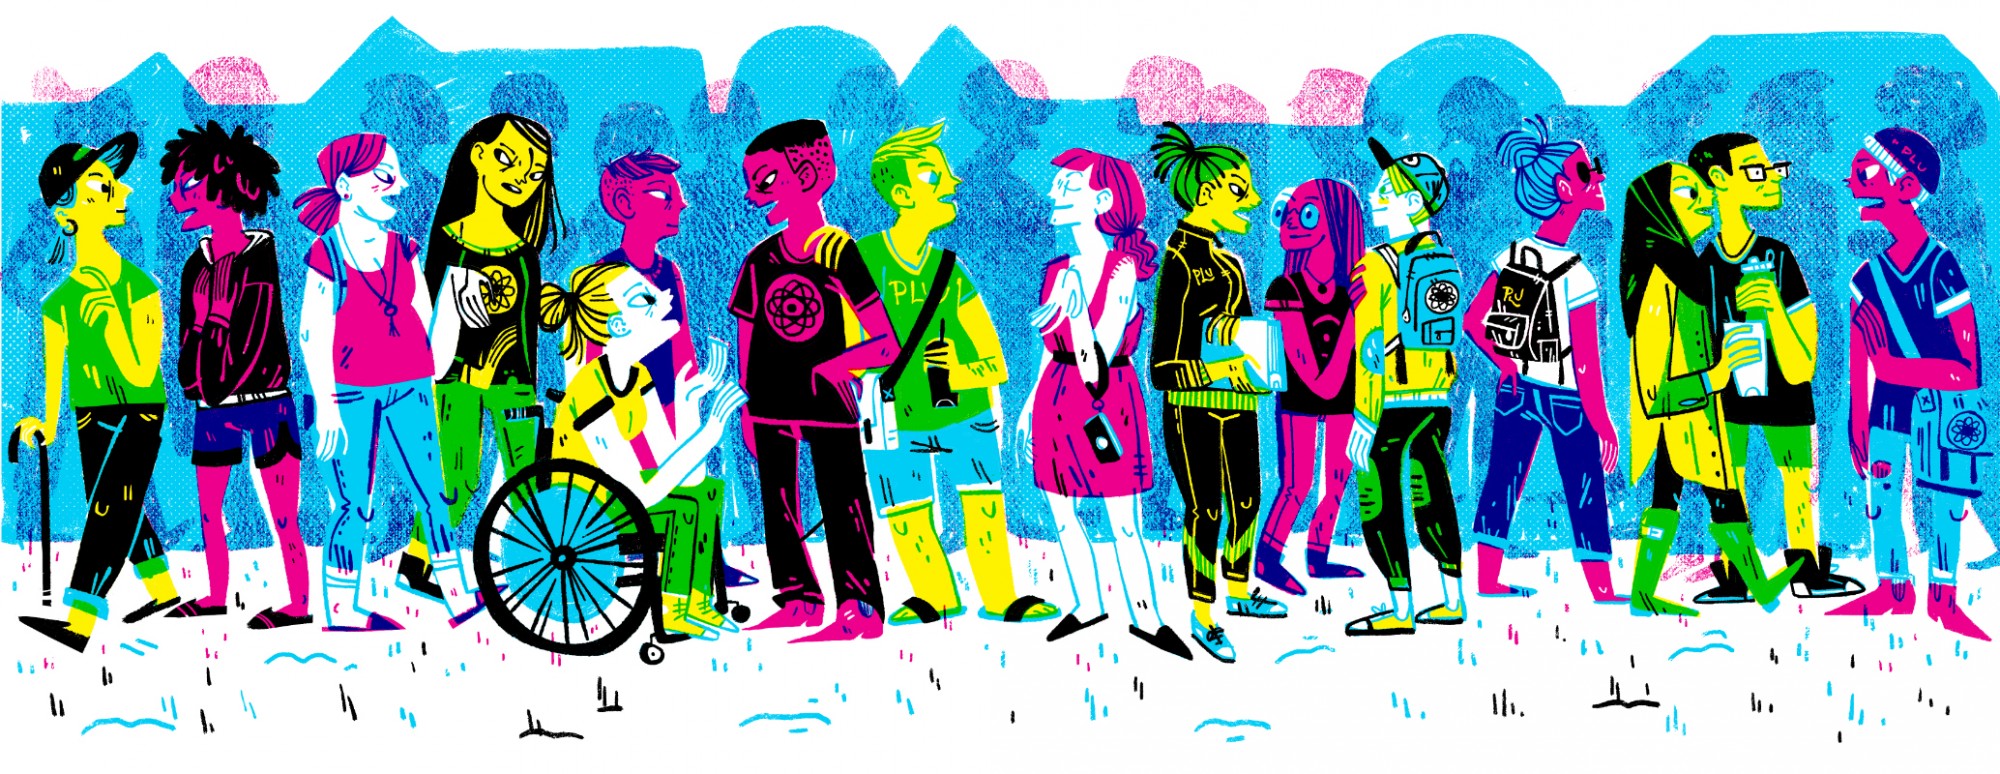 a brightly colored illustration (blues, reds, purples, etc.) of PLU students